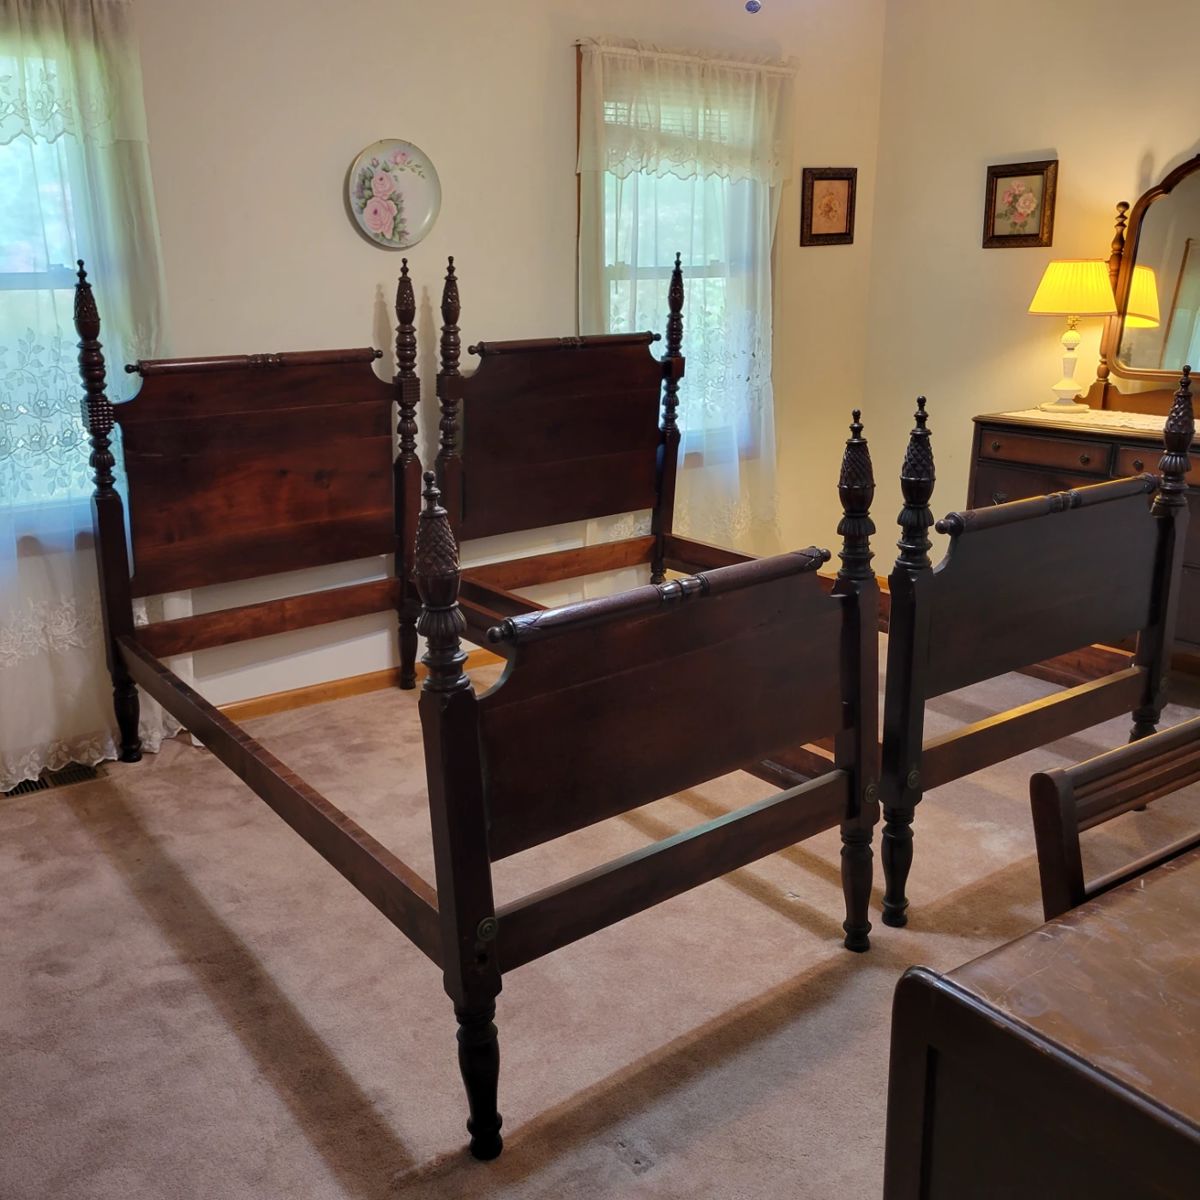 Antique Twin Mahogany Poster Beds